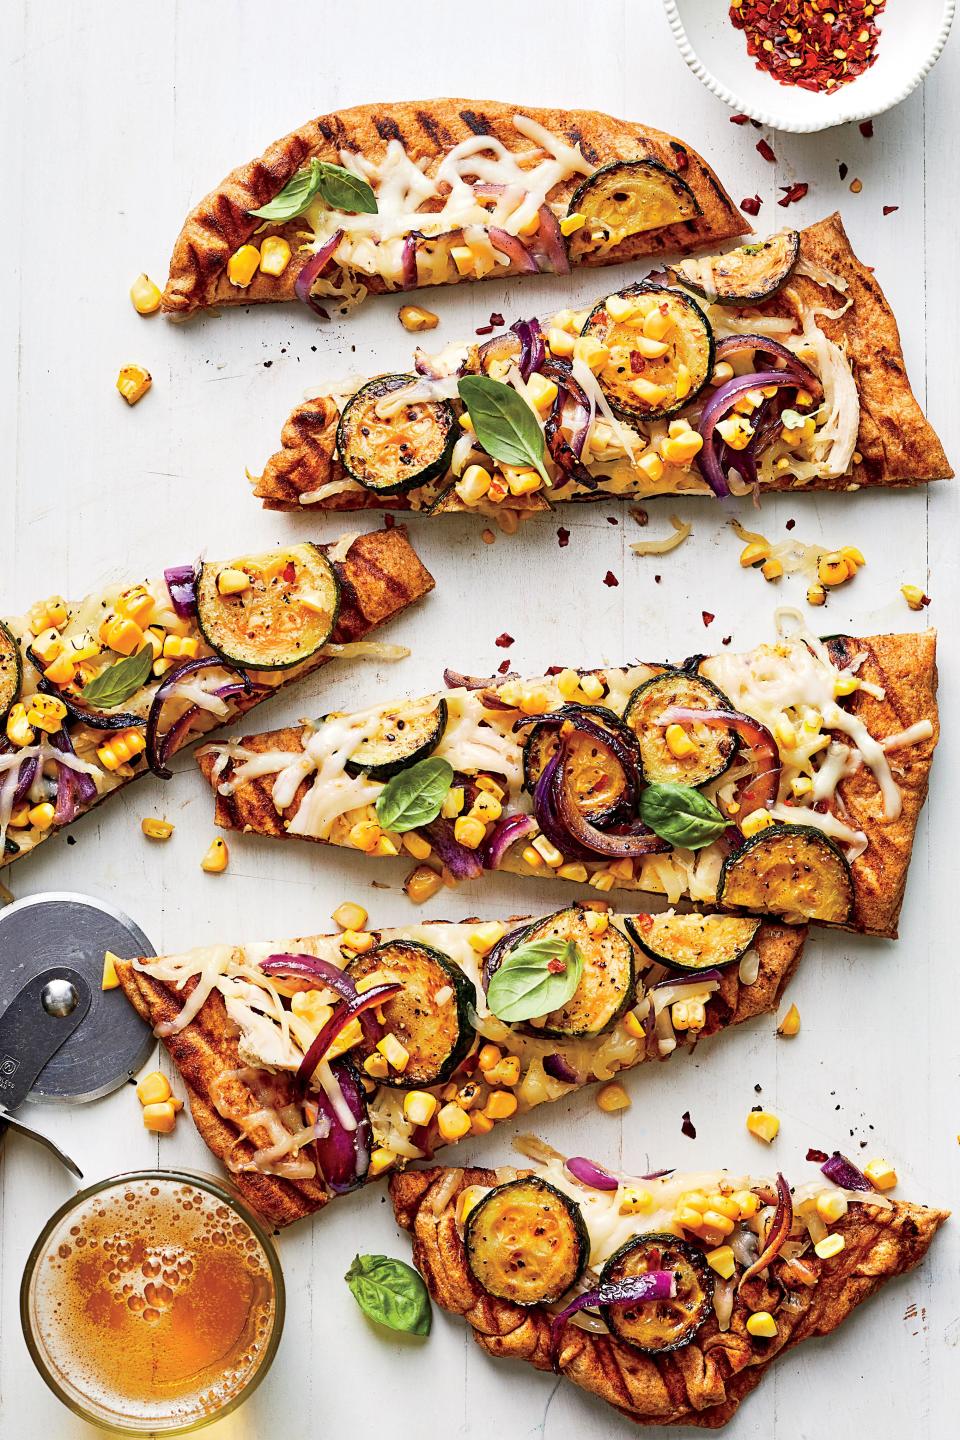 Grilled Pizza with Summer Veggies and Smoked Chicken